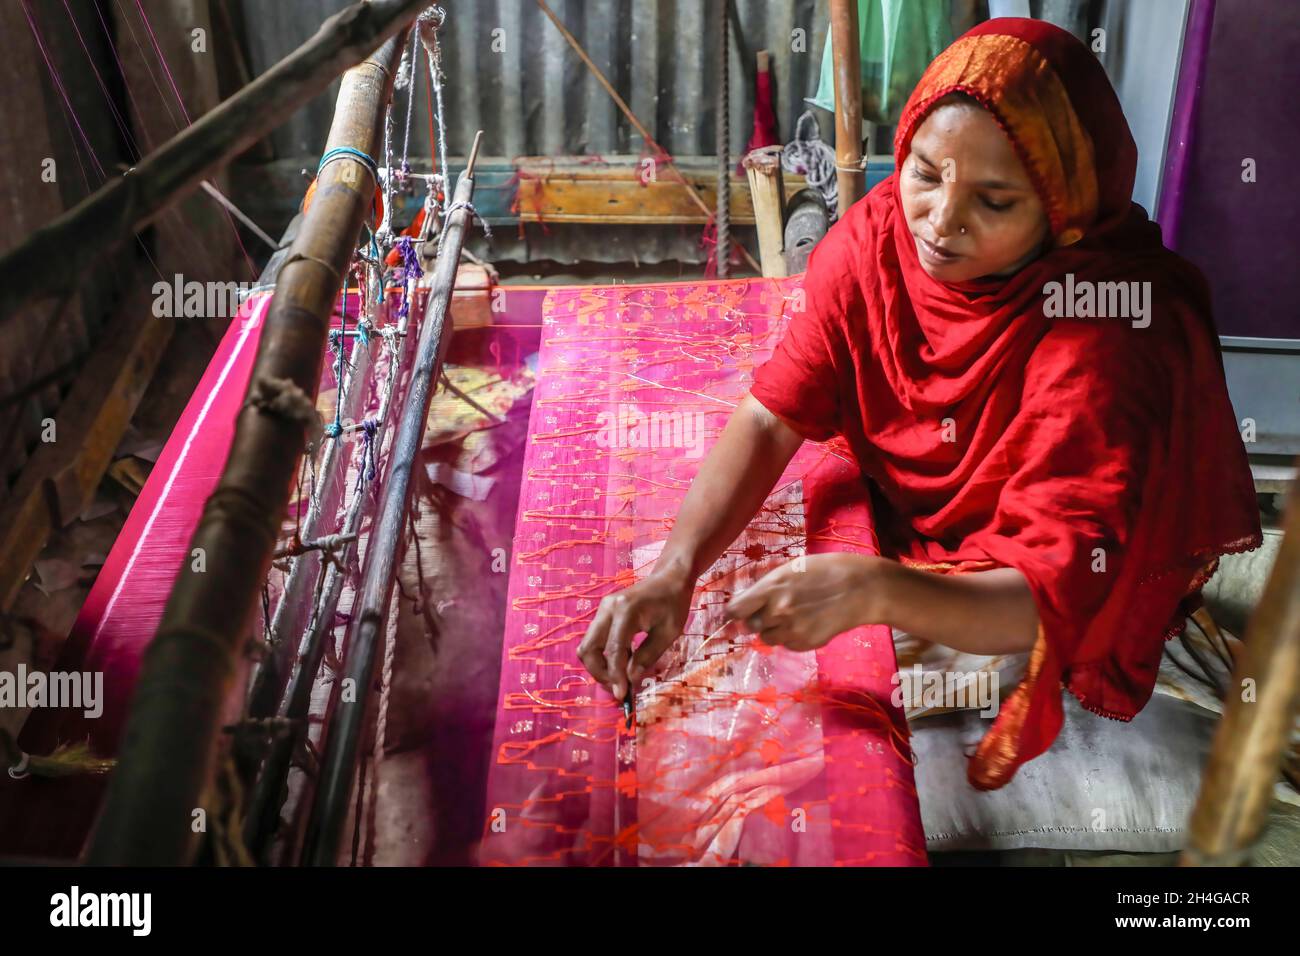 Dhaka, Bangladesh. 02nd Nov, 2021. A women seen making Jamdani saree at Demra Jamdani Palli. Jamdani is one of the finest muslin textiels of Bengal, produced in Dhaka District, Bangladesh for centuries. The Historic production of jamdani was patronized by imperial warrants of the Mughal emperors. Under British colonialism, the Bengali Jamdani and muslin industries rapidly declined due to colonial import policies favoring industrially manufactured textiles. Credit: SOPA Images Limited/Alamy Live News Stock Photo